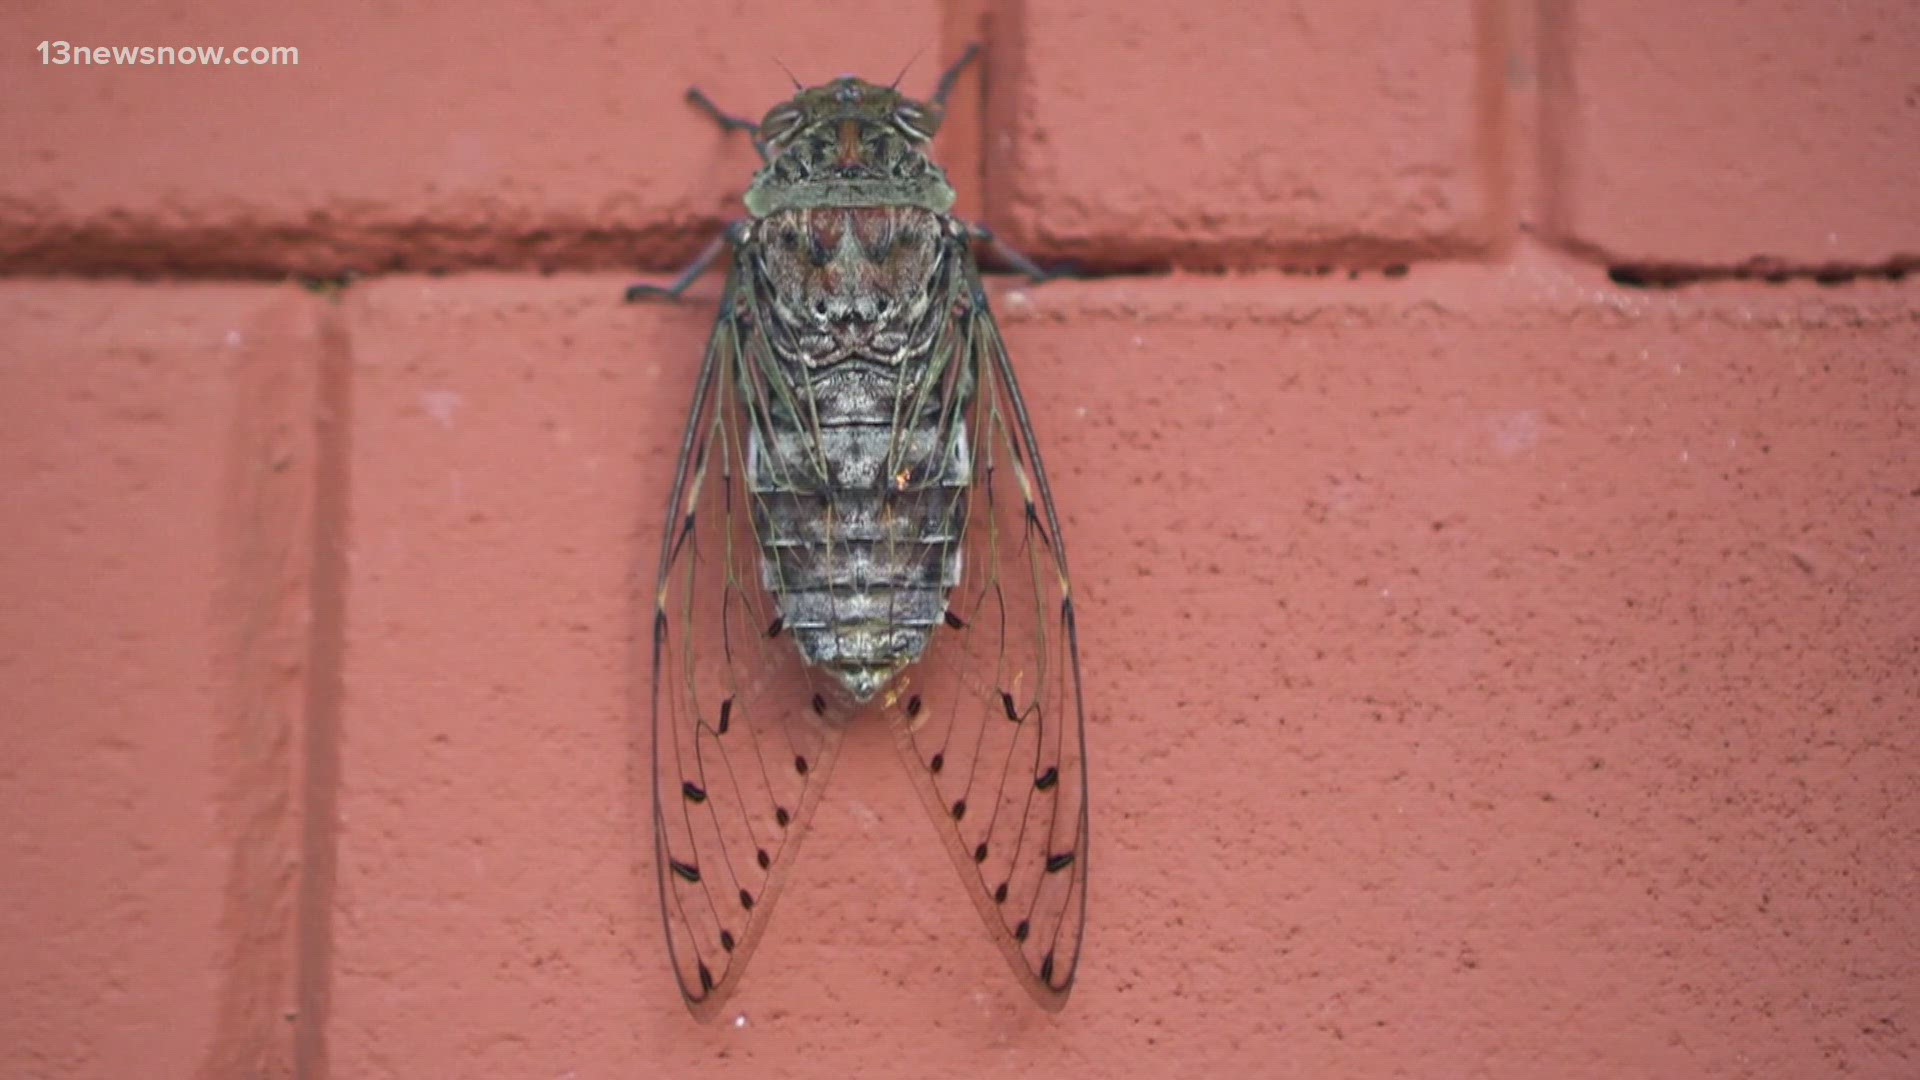 This is the first time we'll see this many cicadas since the 1800s due to the time frames of their emerging lining up.